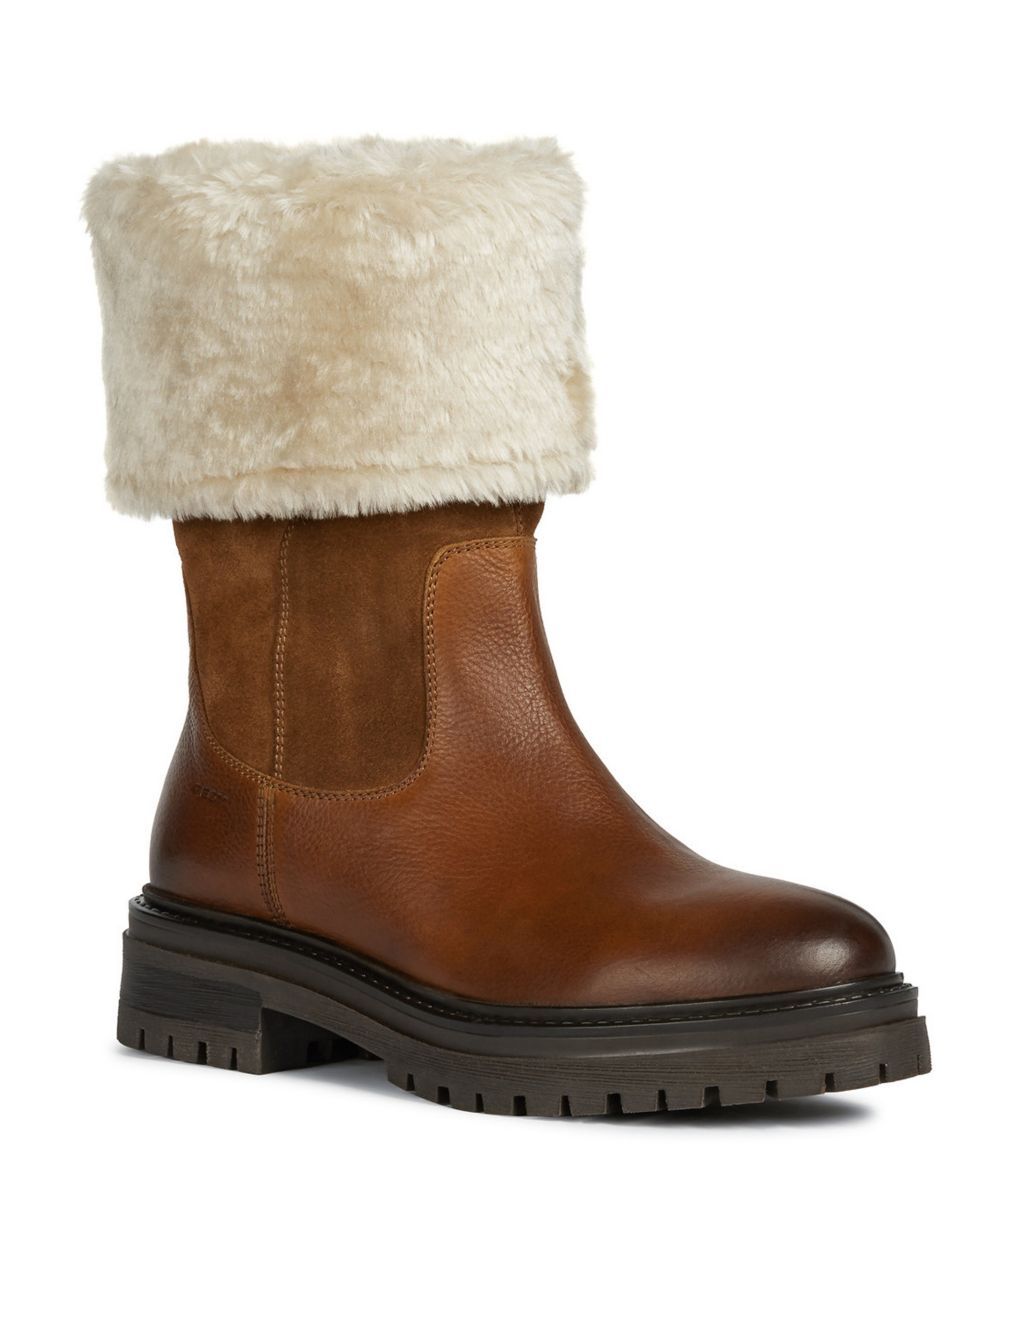 Leather Faux Fur Chunky Winter Boots image 2